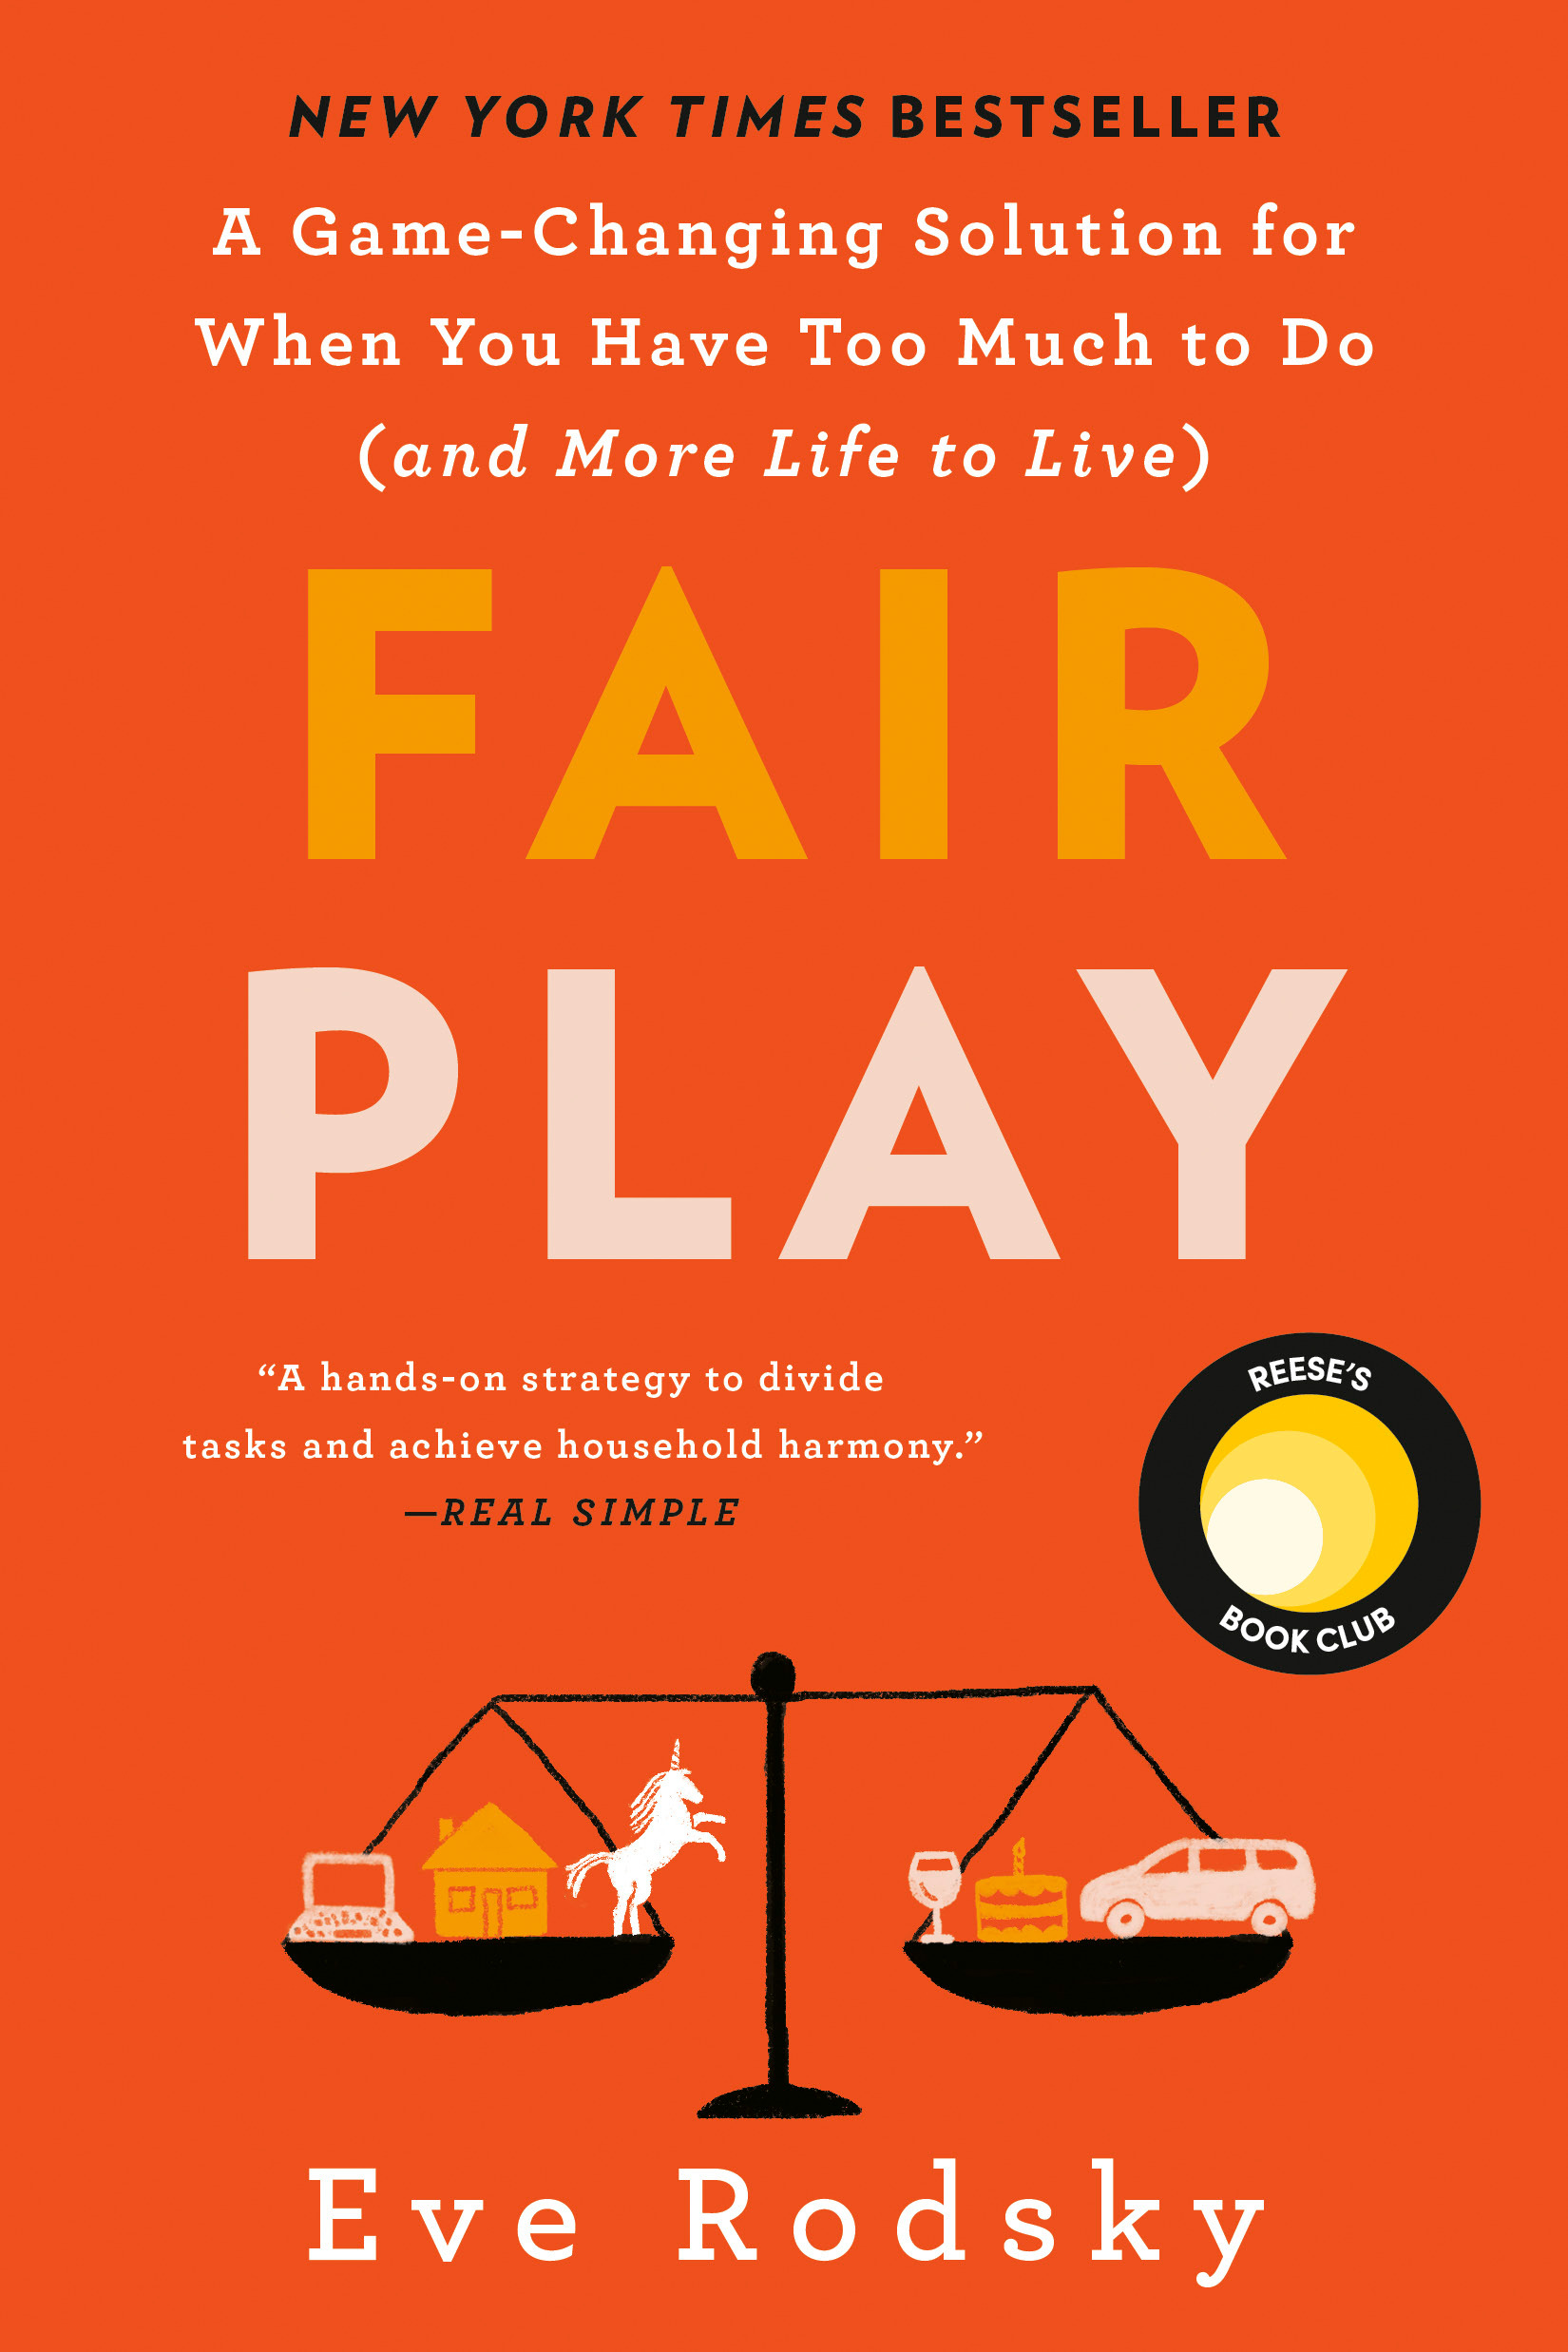 Fair Play : A Game-Changing Solution for When You Have Too Much to Do (and More Life to Live) | Business & Management